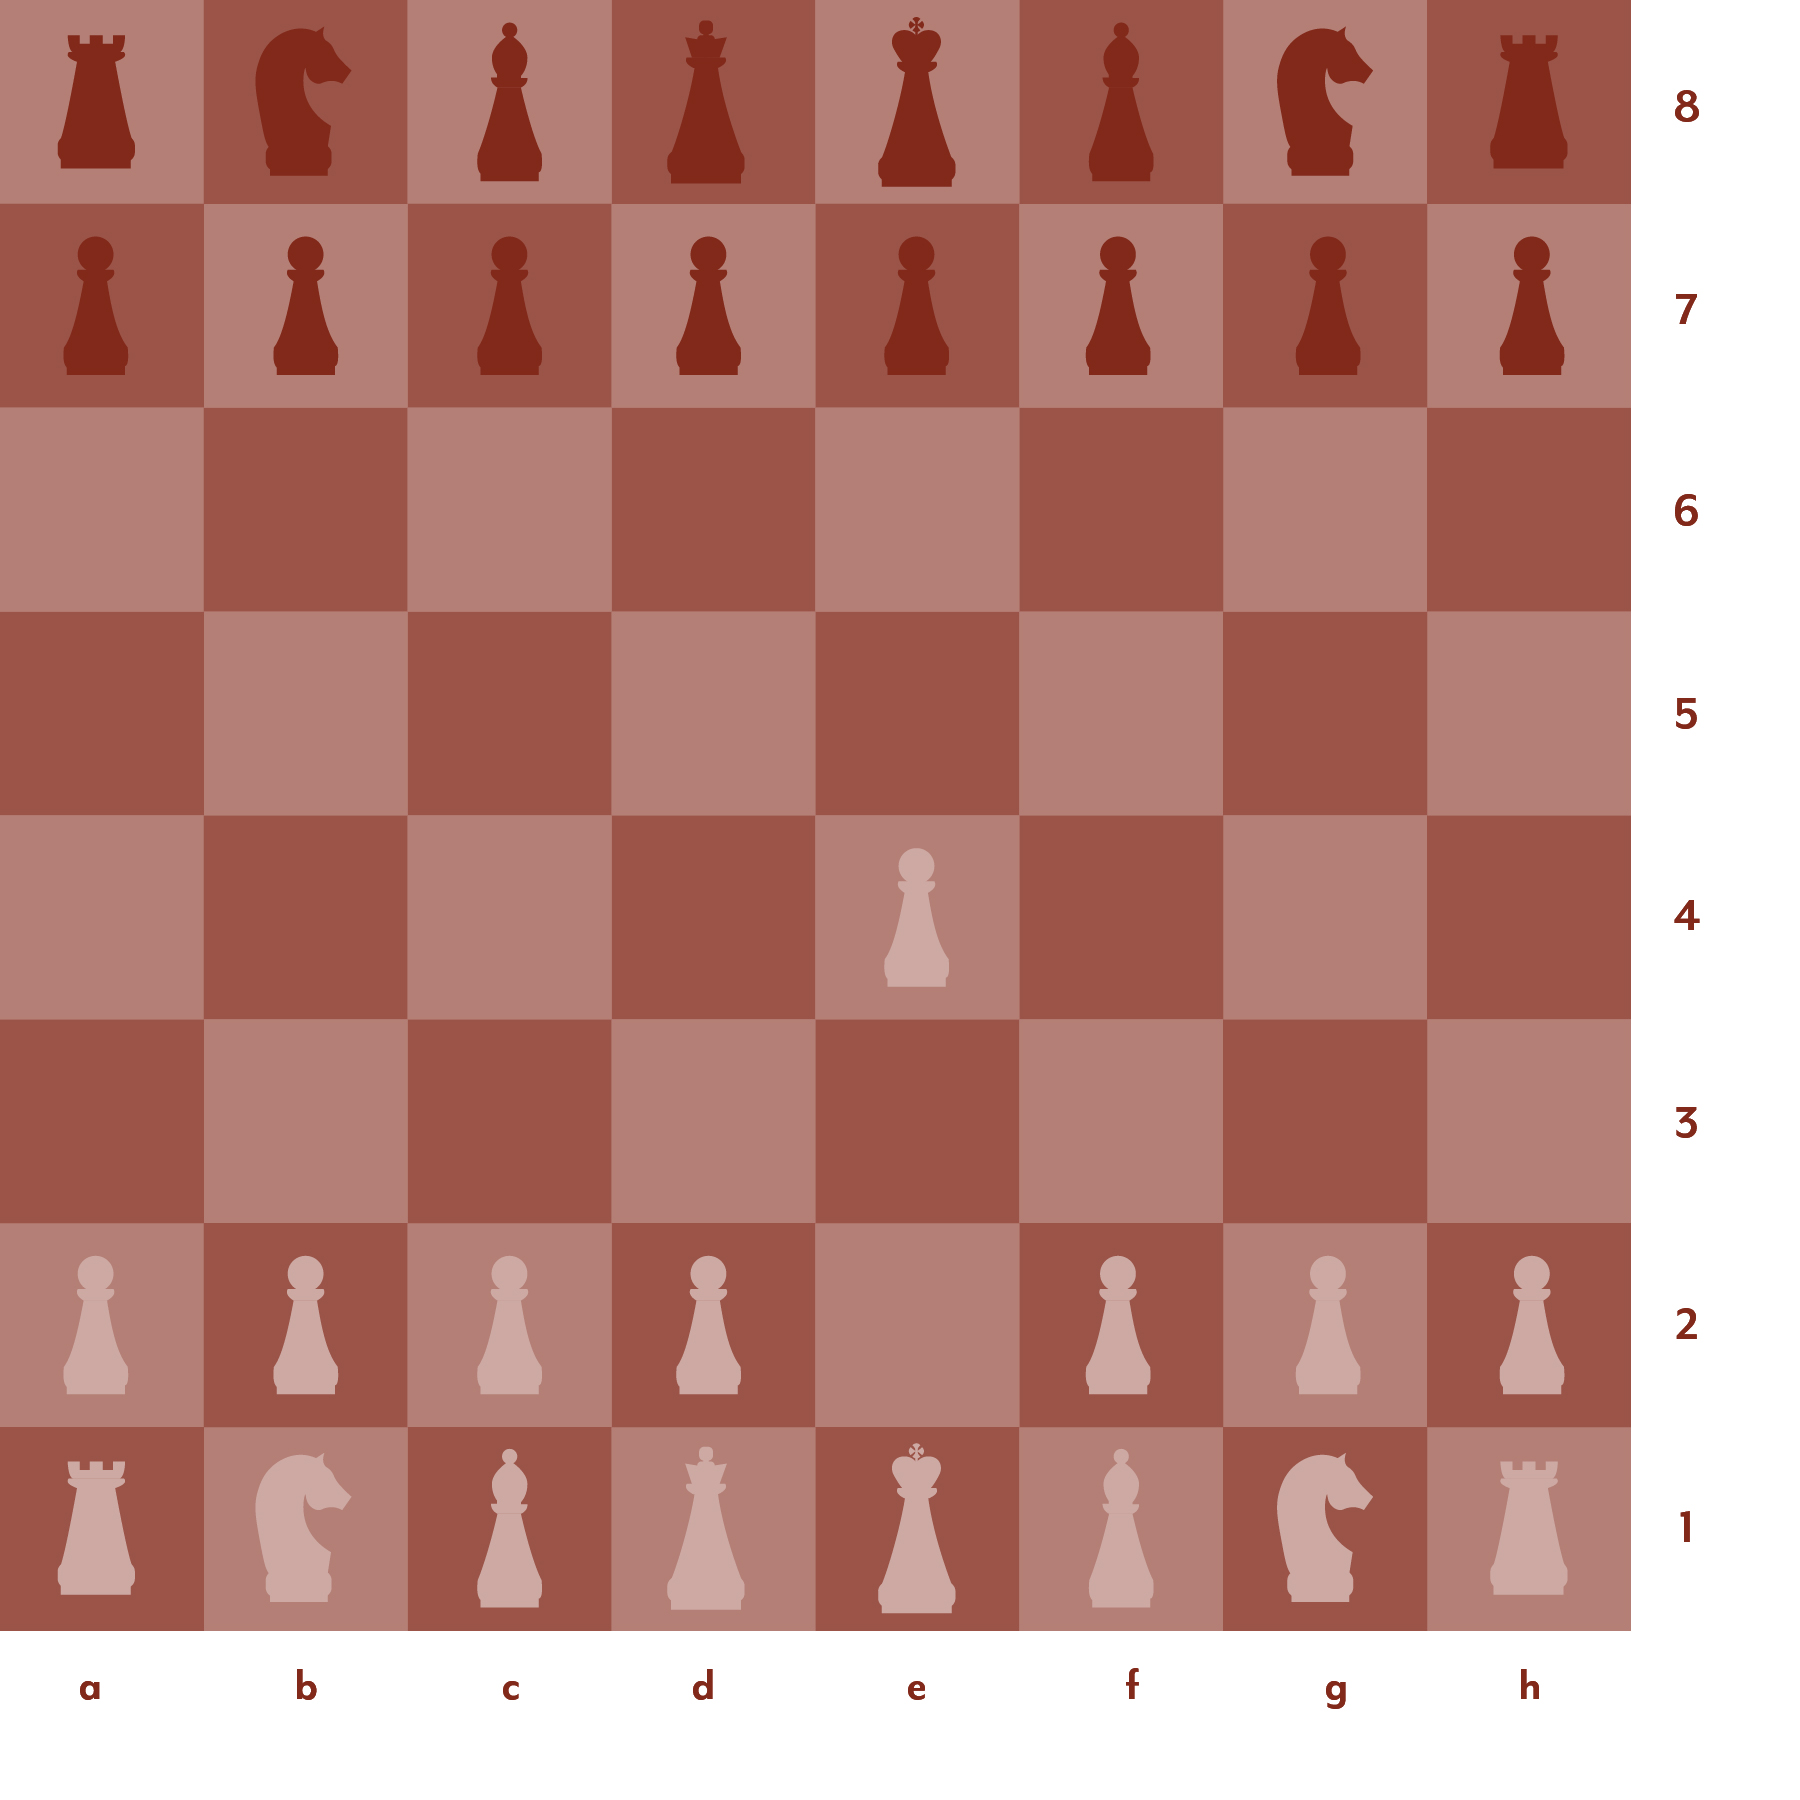 The STRONGEST Opening In Chess 